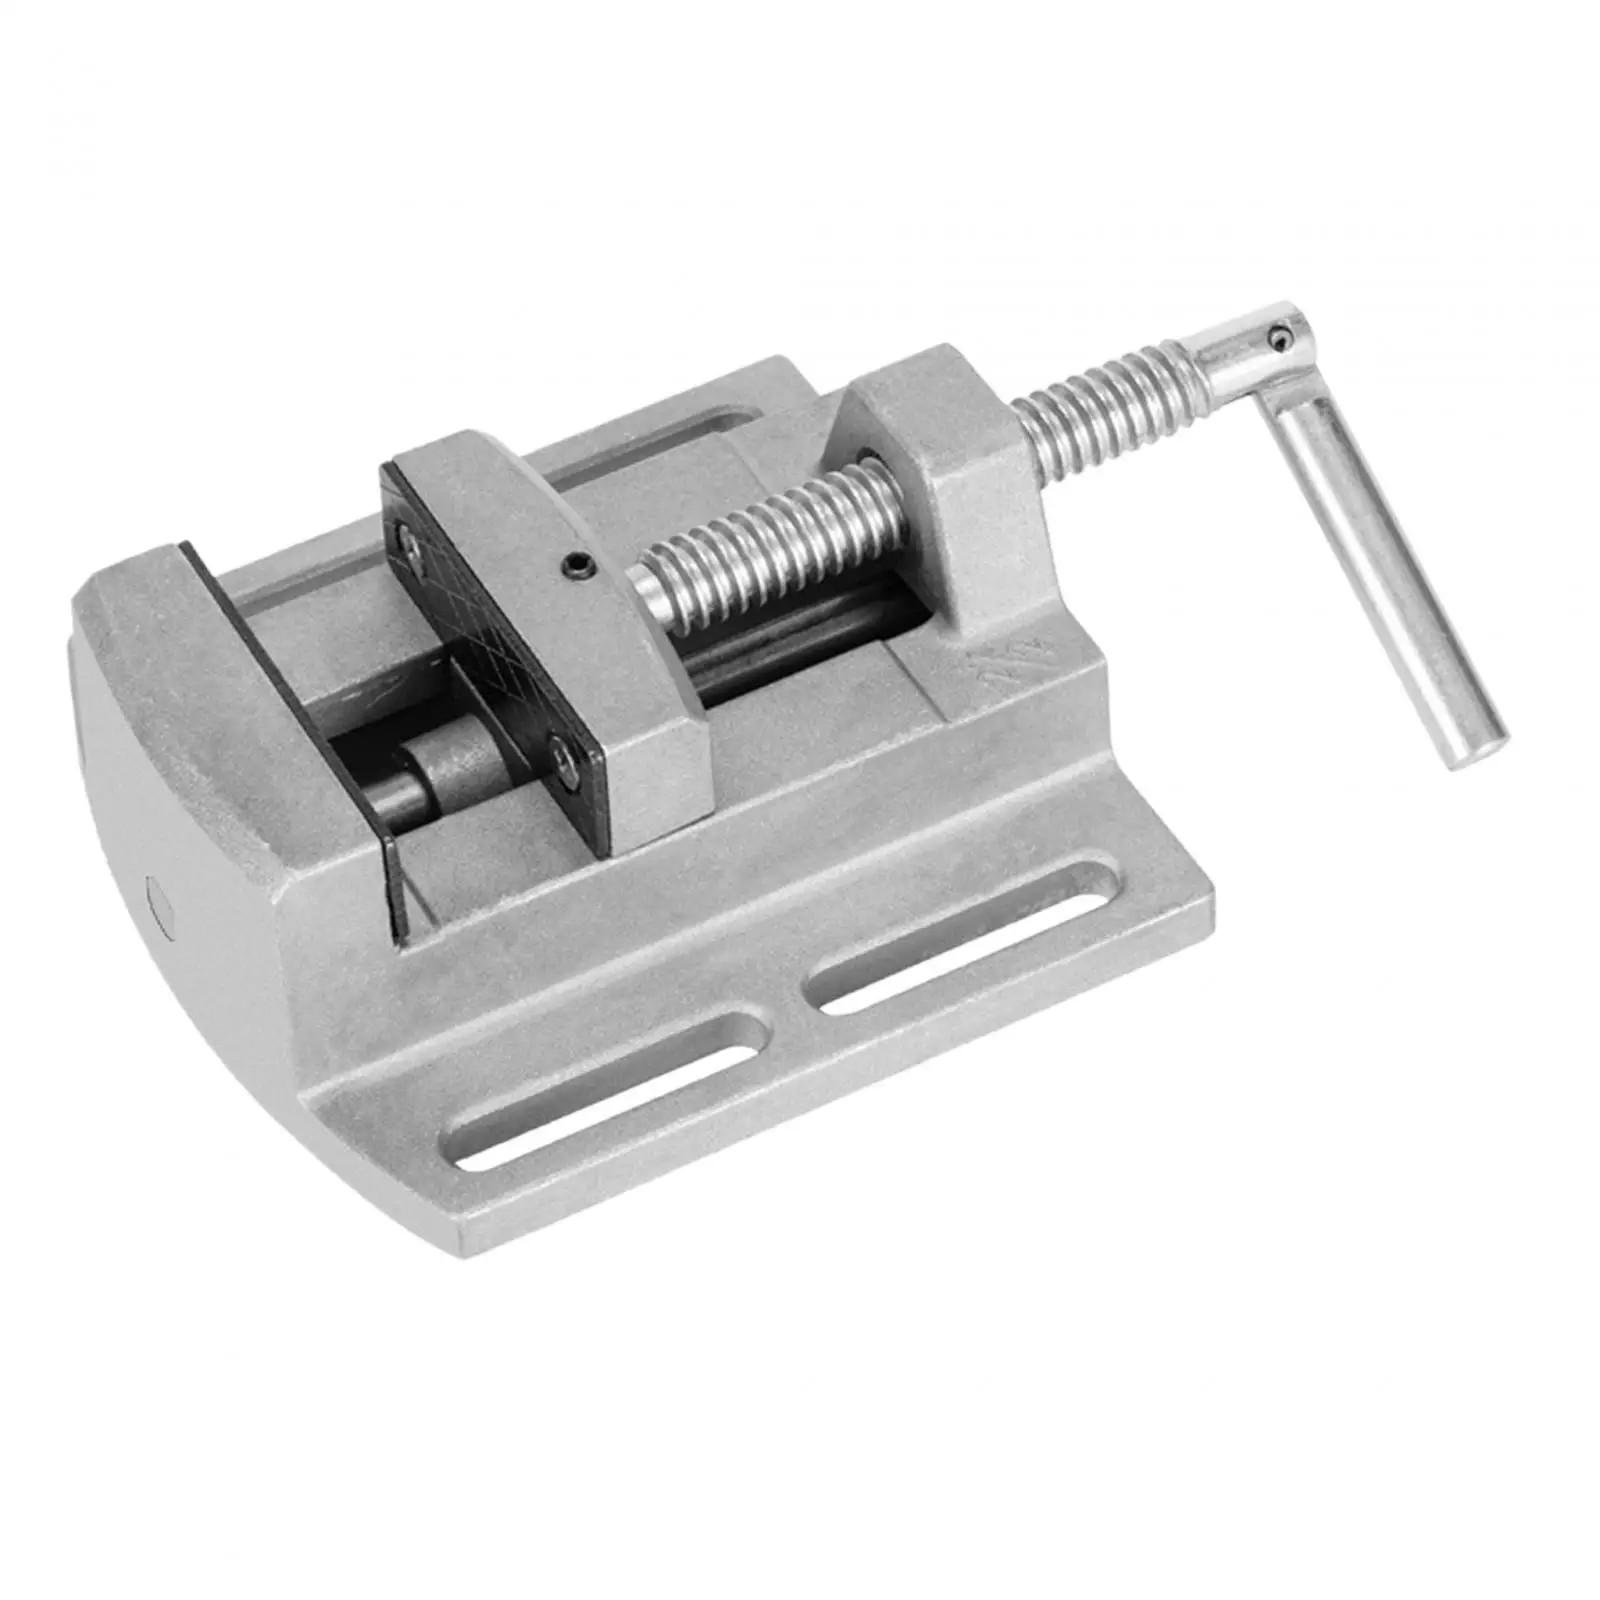 Drill Press Vise DIY Hobby Table Tool Vise Woodworking Clamps Sculpture Model